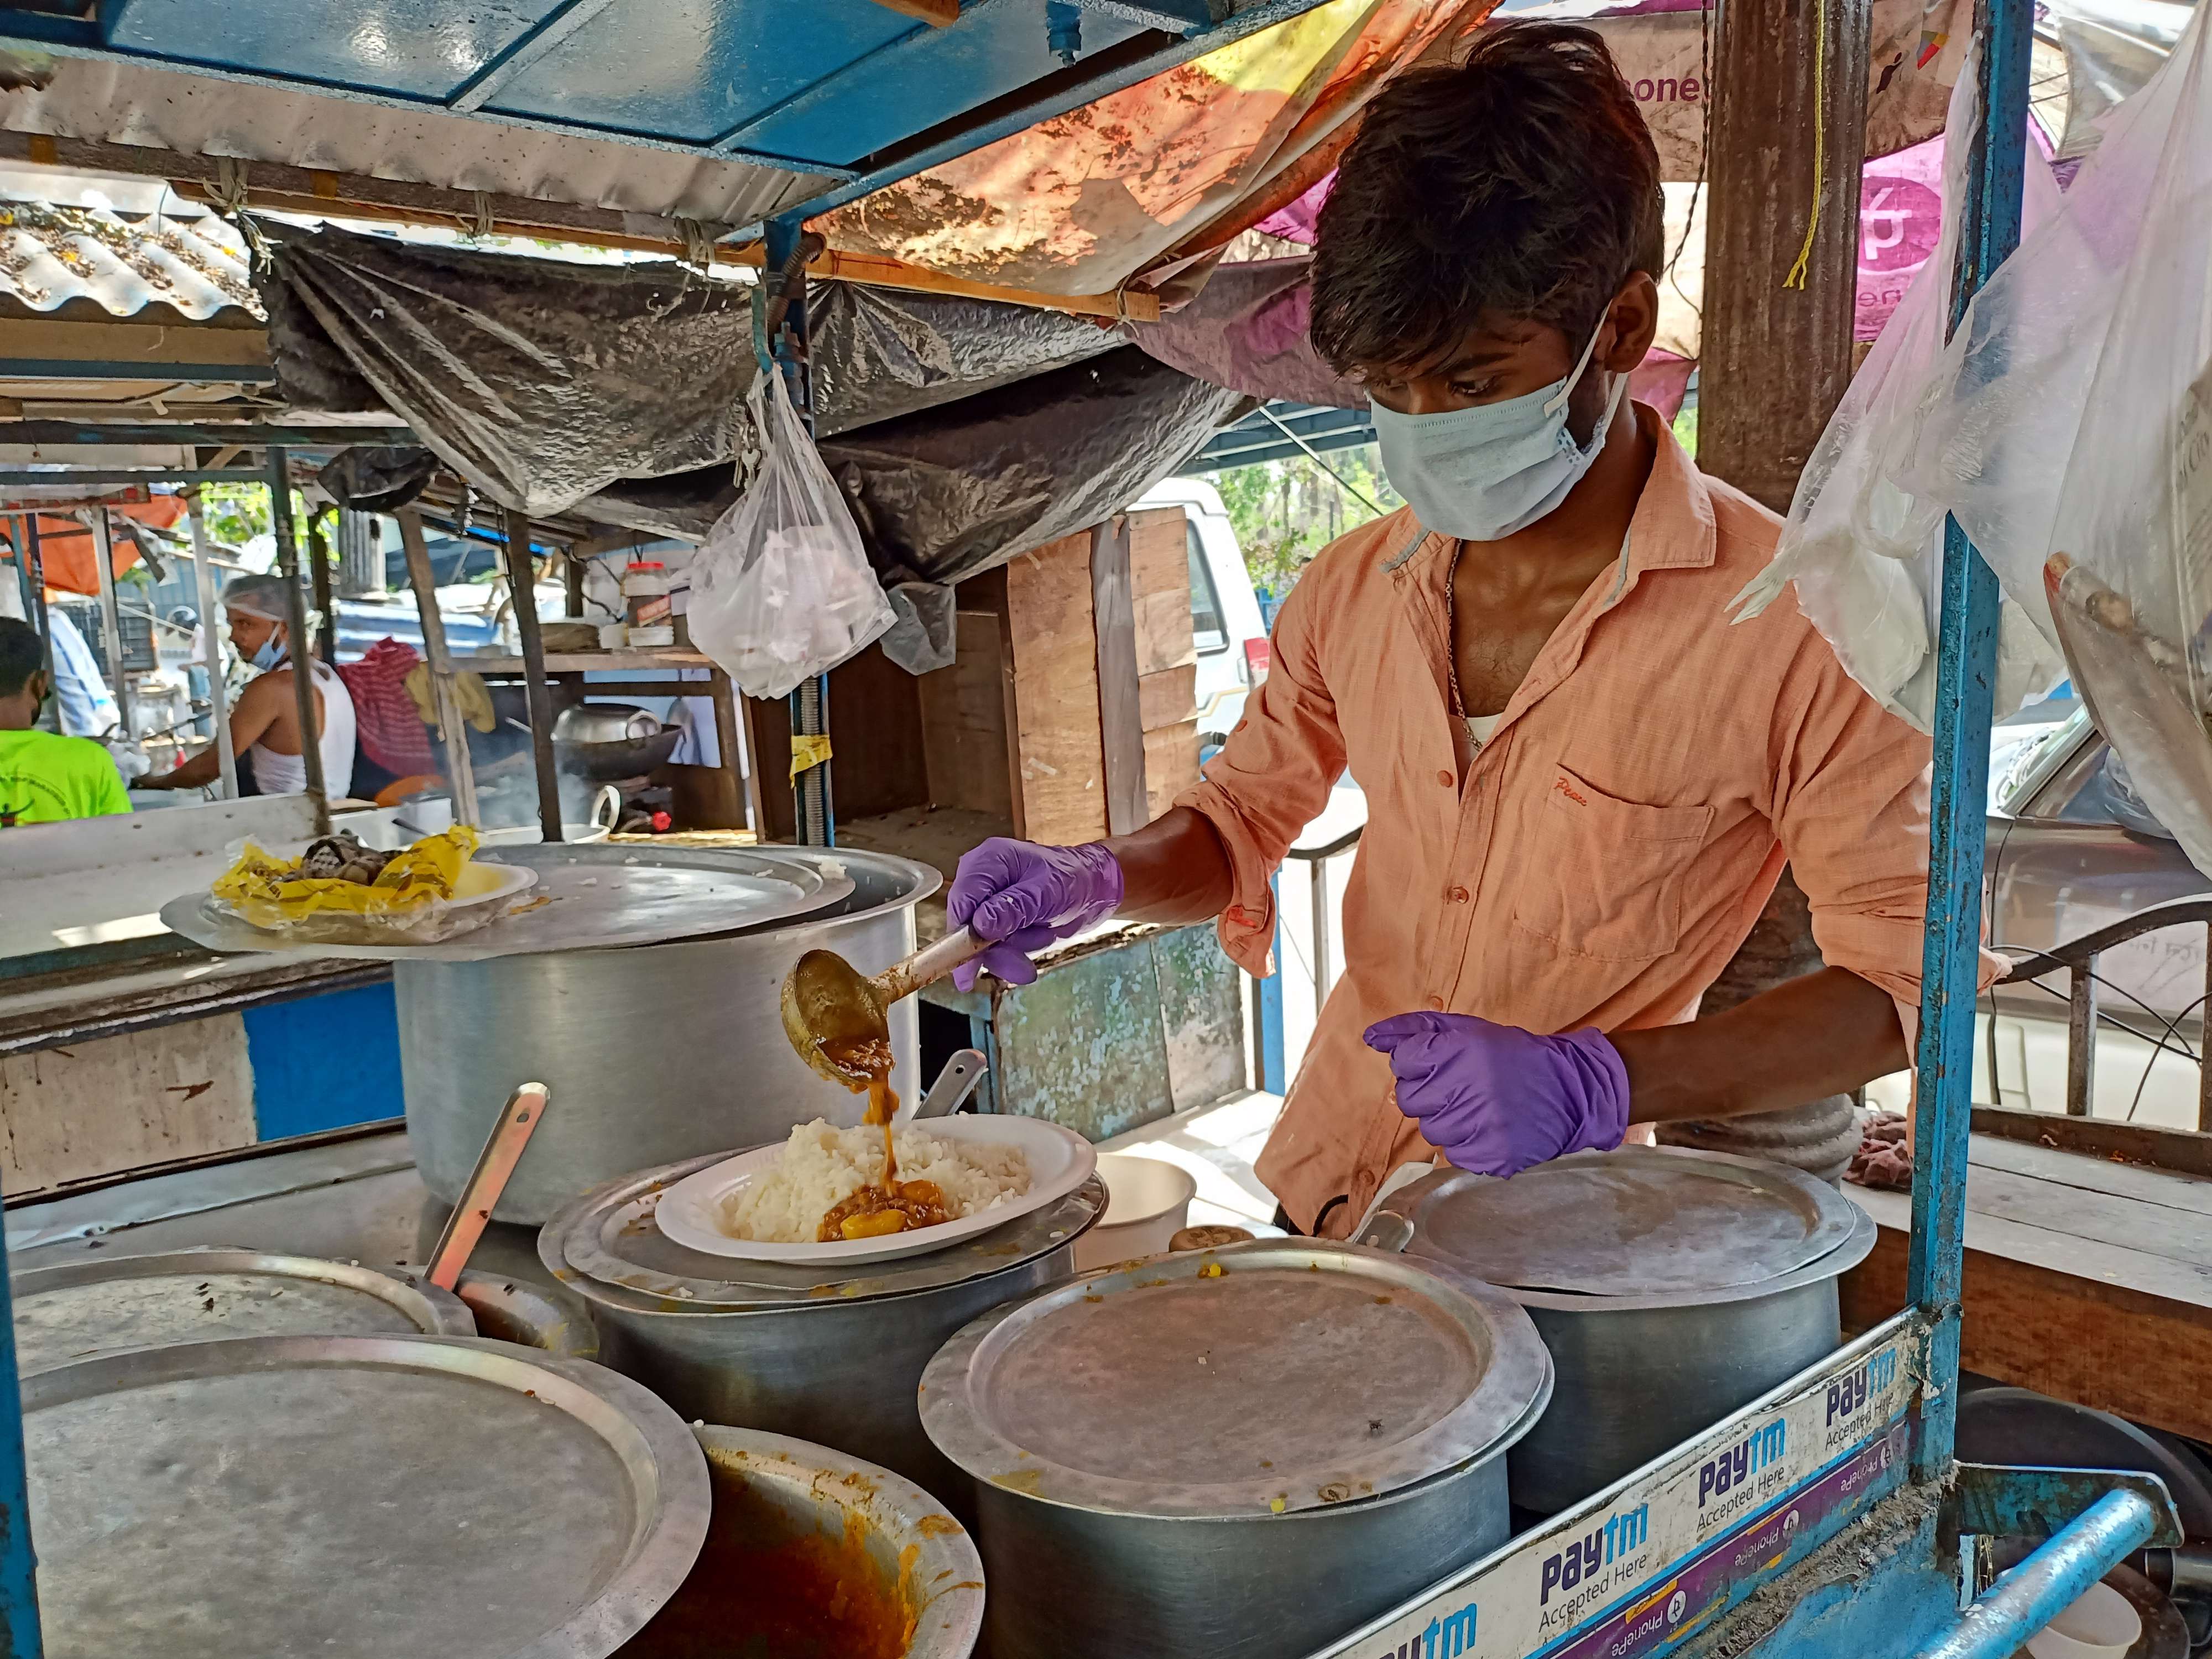 Masks, sanitisers and DIY kits: Street food vendors get their first taste of new normal | Kolkata News - Times of India